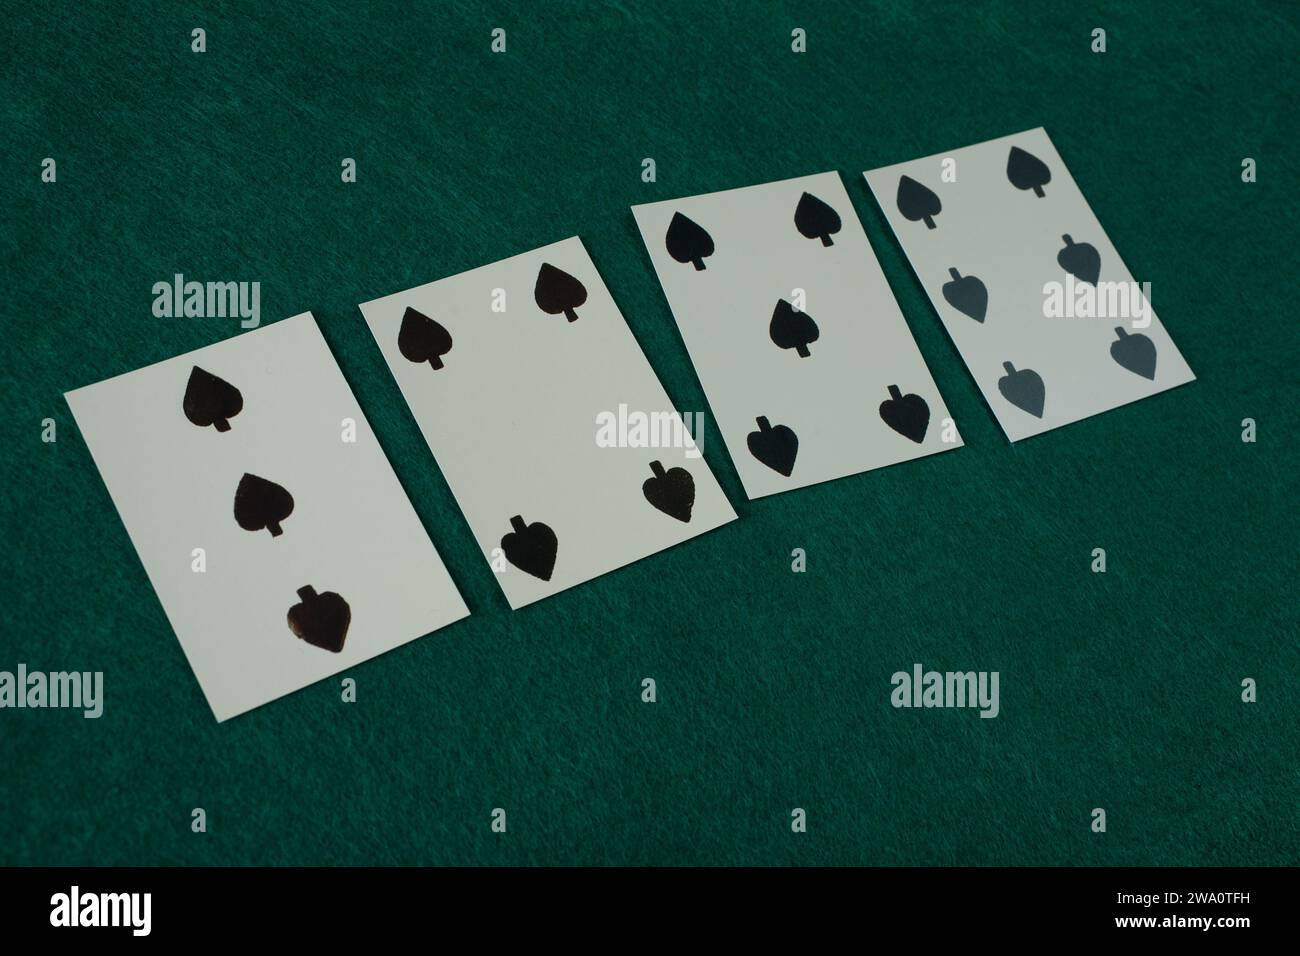 Old west era playing card on green gambling table. 3,4,5,6 of spades. Stock Photo